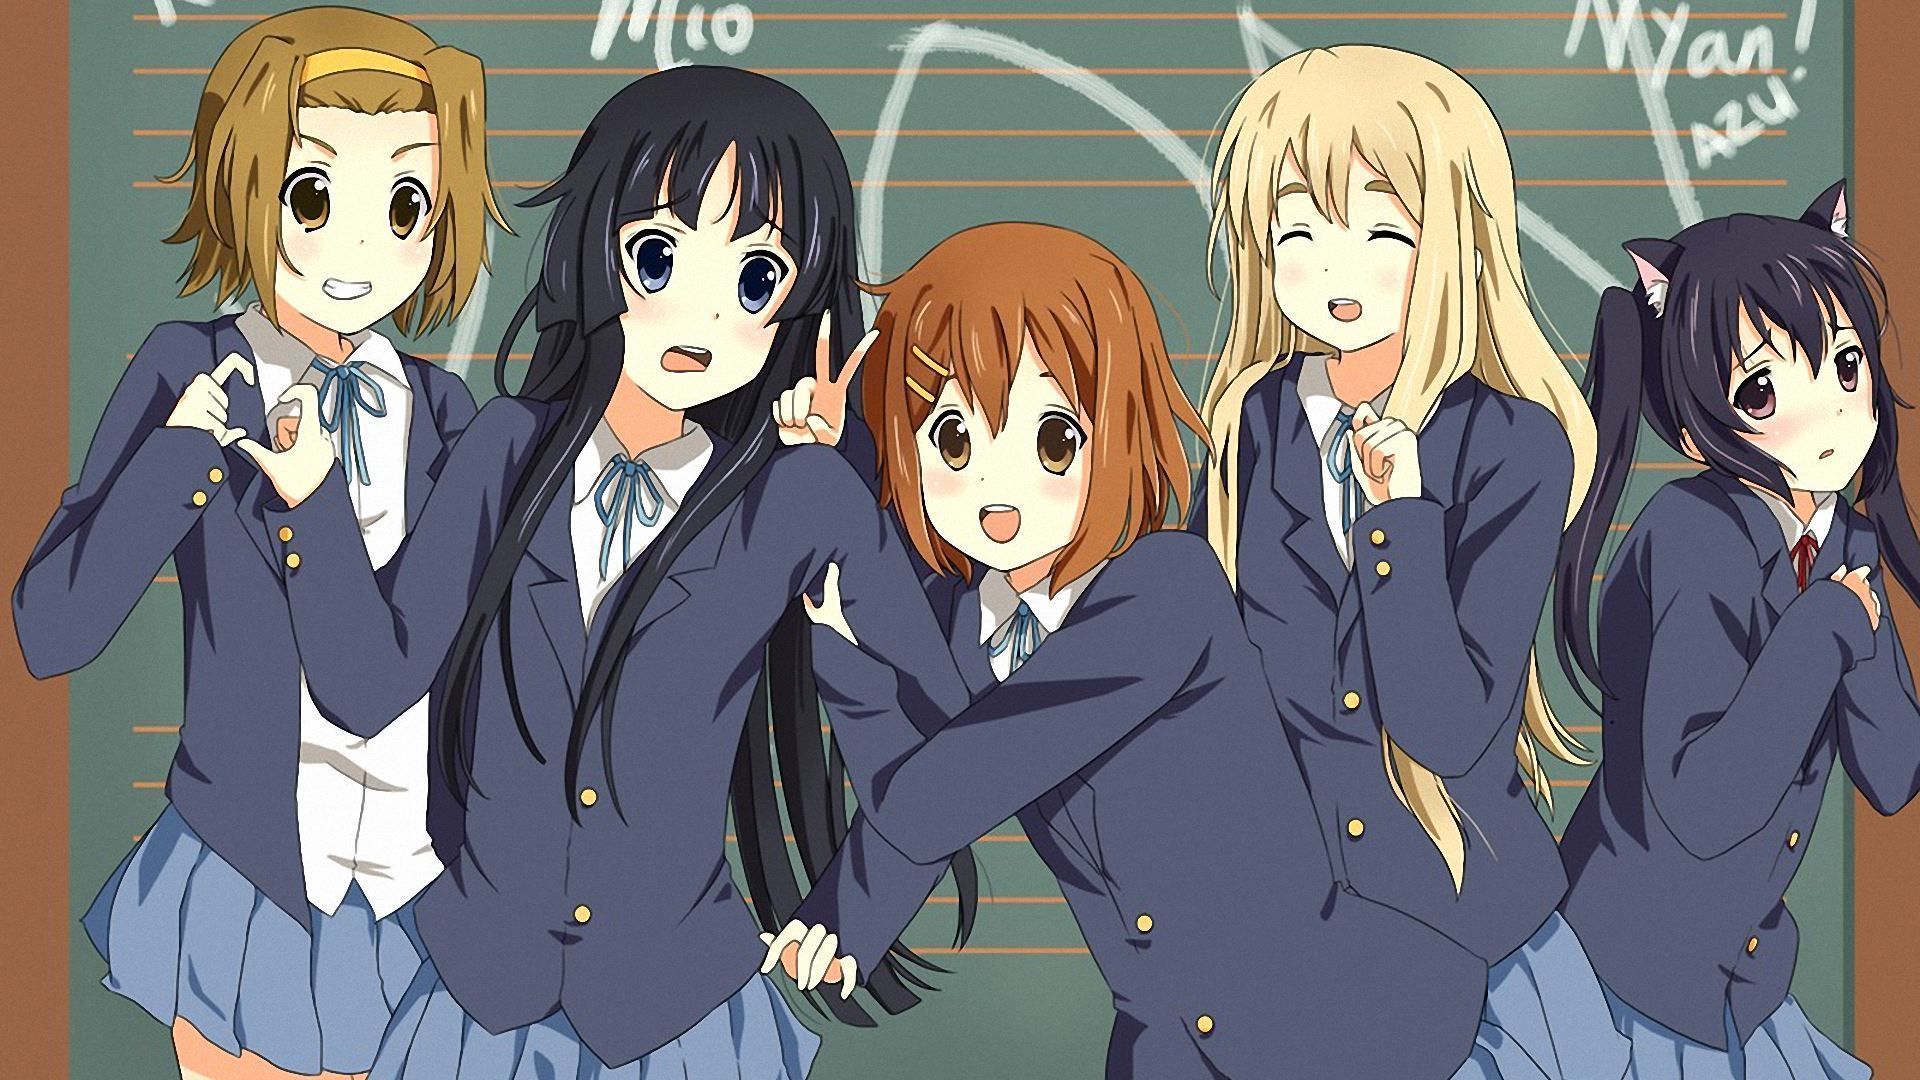 Funny K-ON! Wallpaper 1920x1080 Wallpapers, 1920x1080 Wallpapers ...